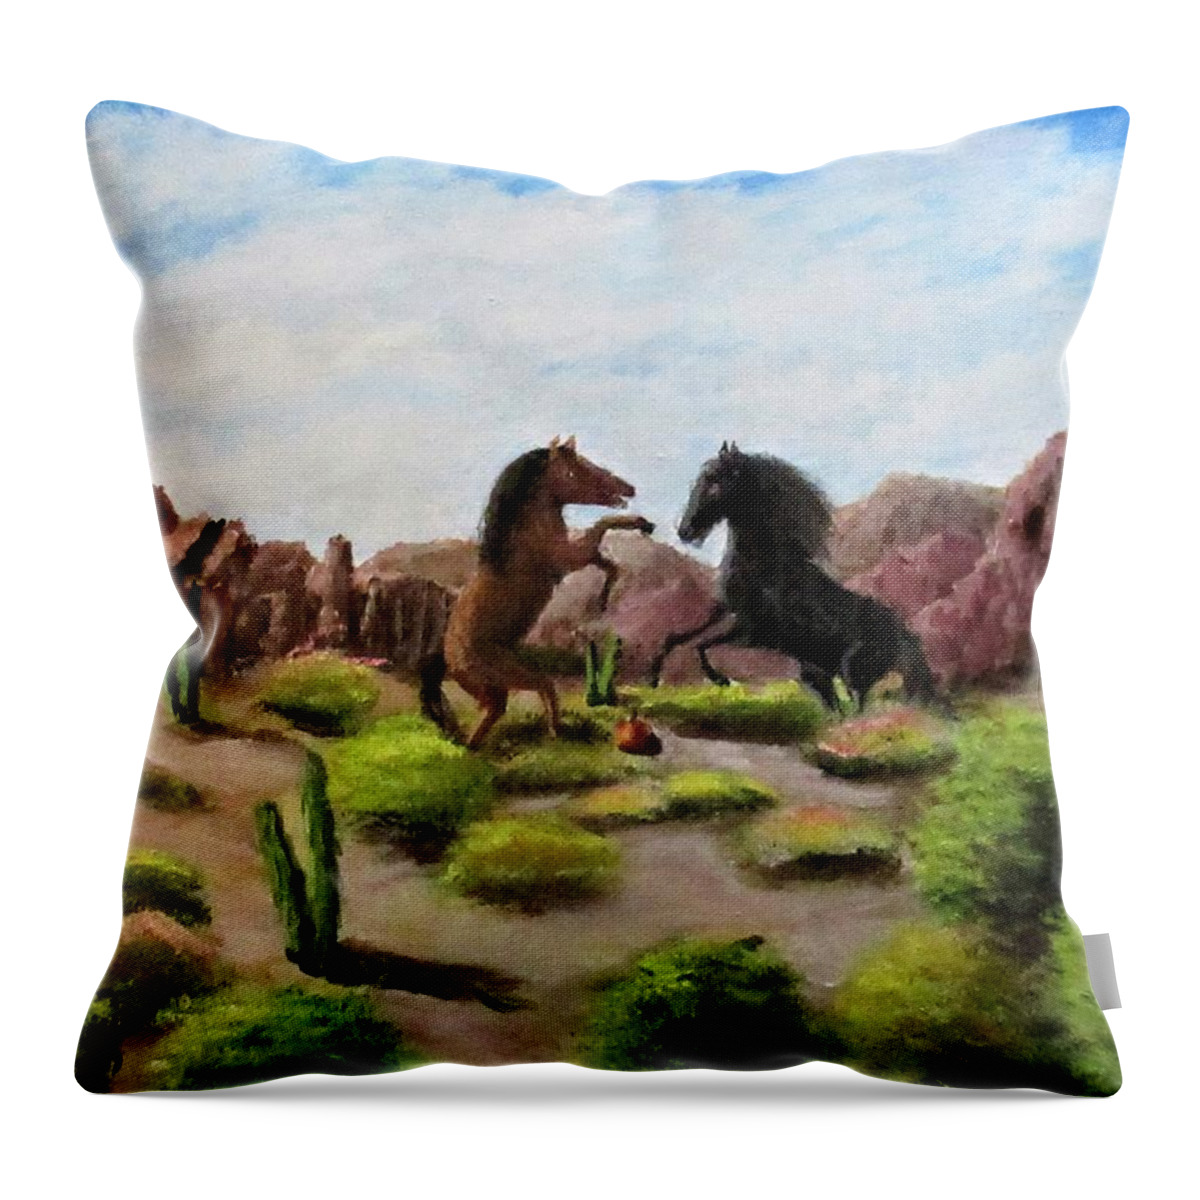 Animals Throw Pillow featuring the painting Apple Fight by Gregory Dorosh